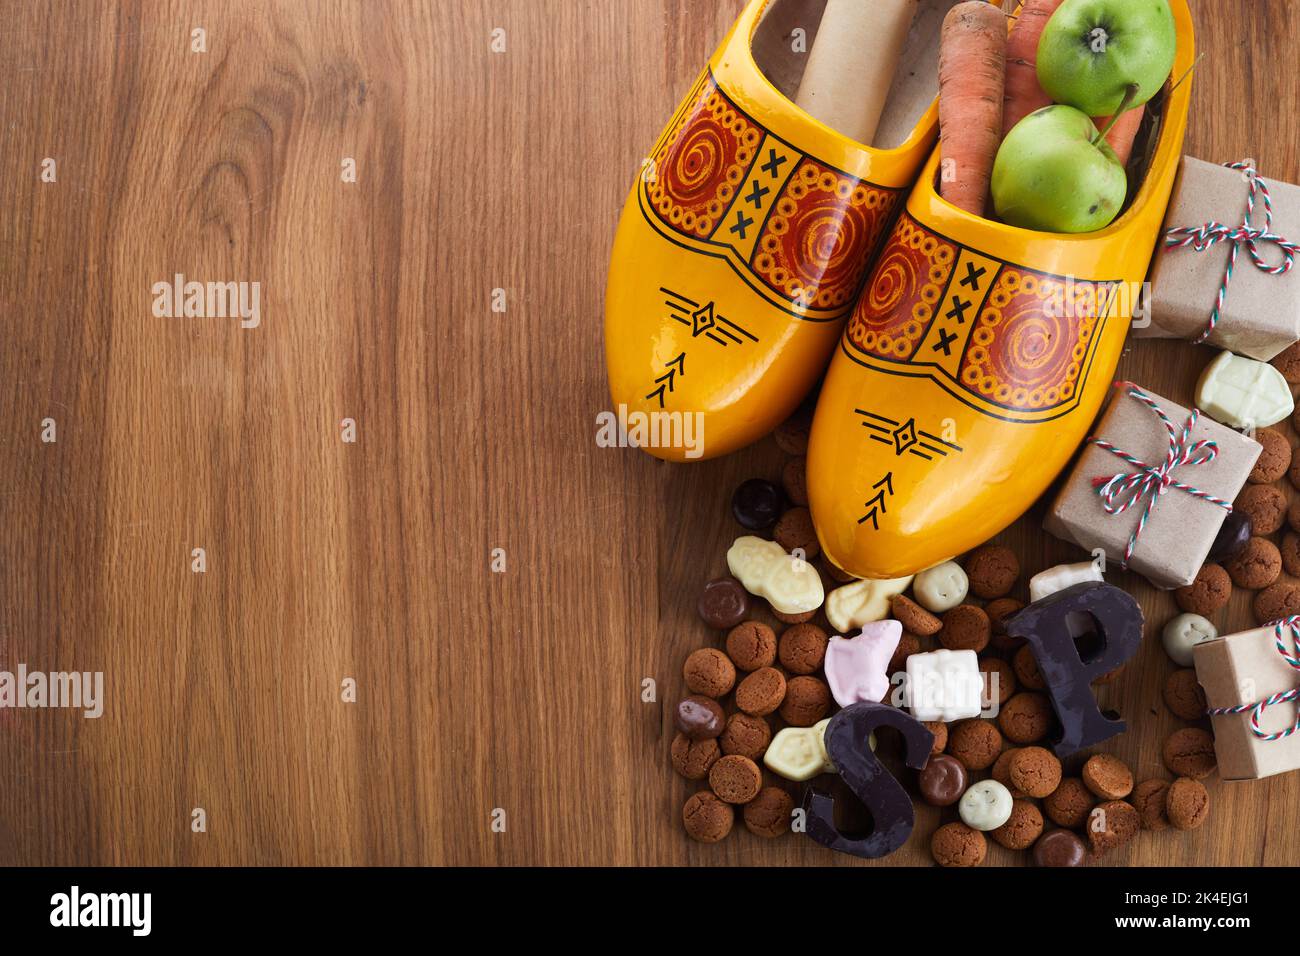 Saint Nicholas - Sinterklaas day with shoe, carrot and traditional sweets on wooden background Stock Photo